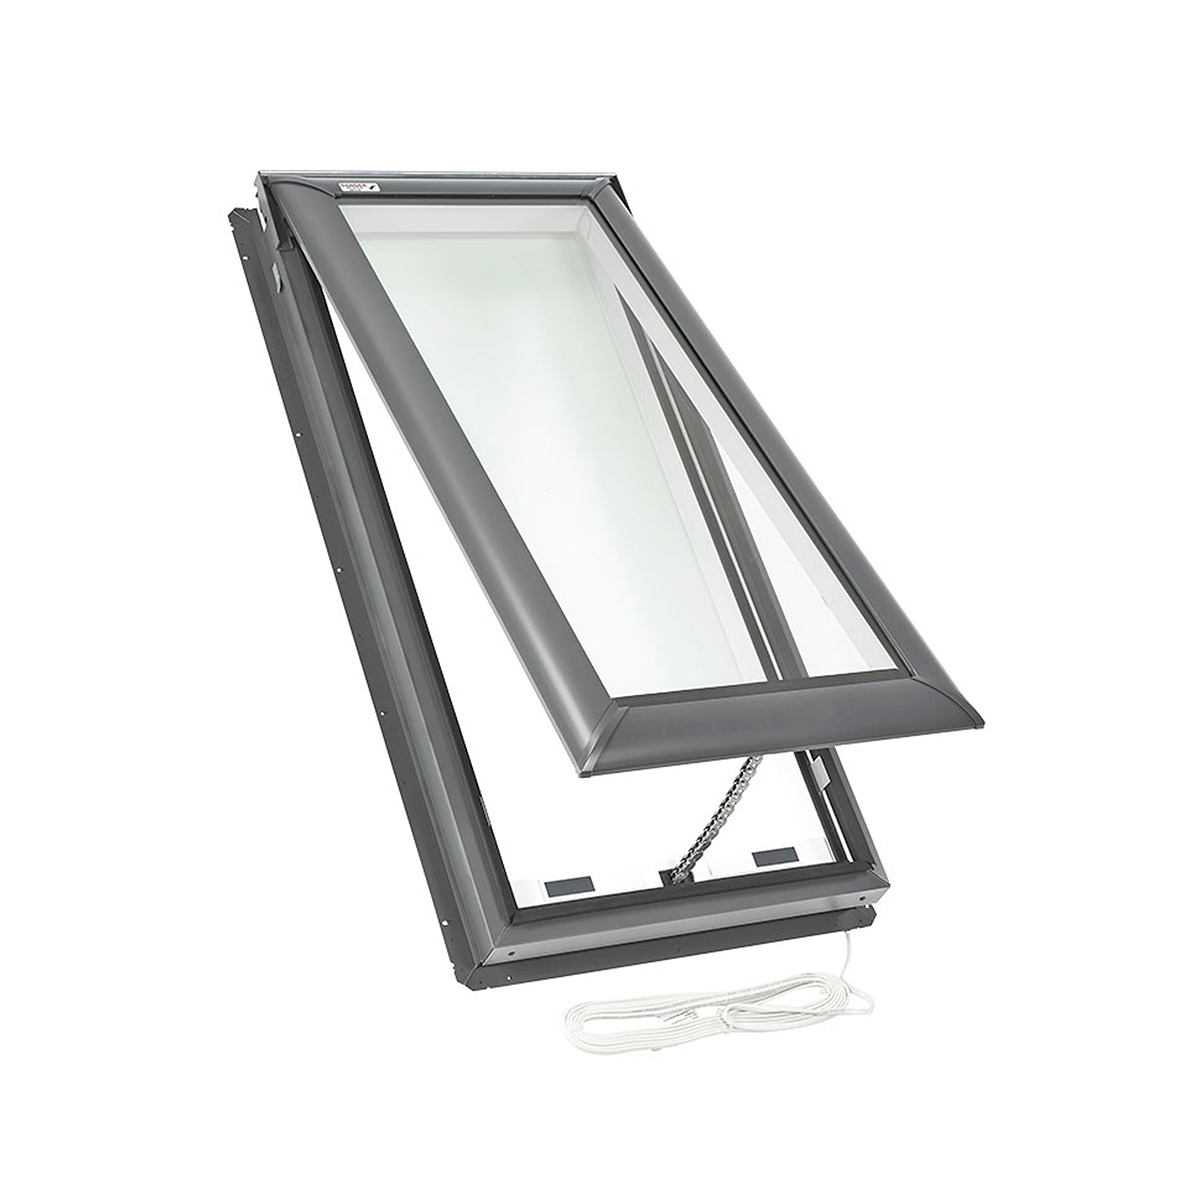 Electric Deck-Mount Skylight with Laminated Low-E3 Glass - 21 in. x 54-7/16 in. - VSE C08